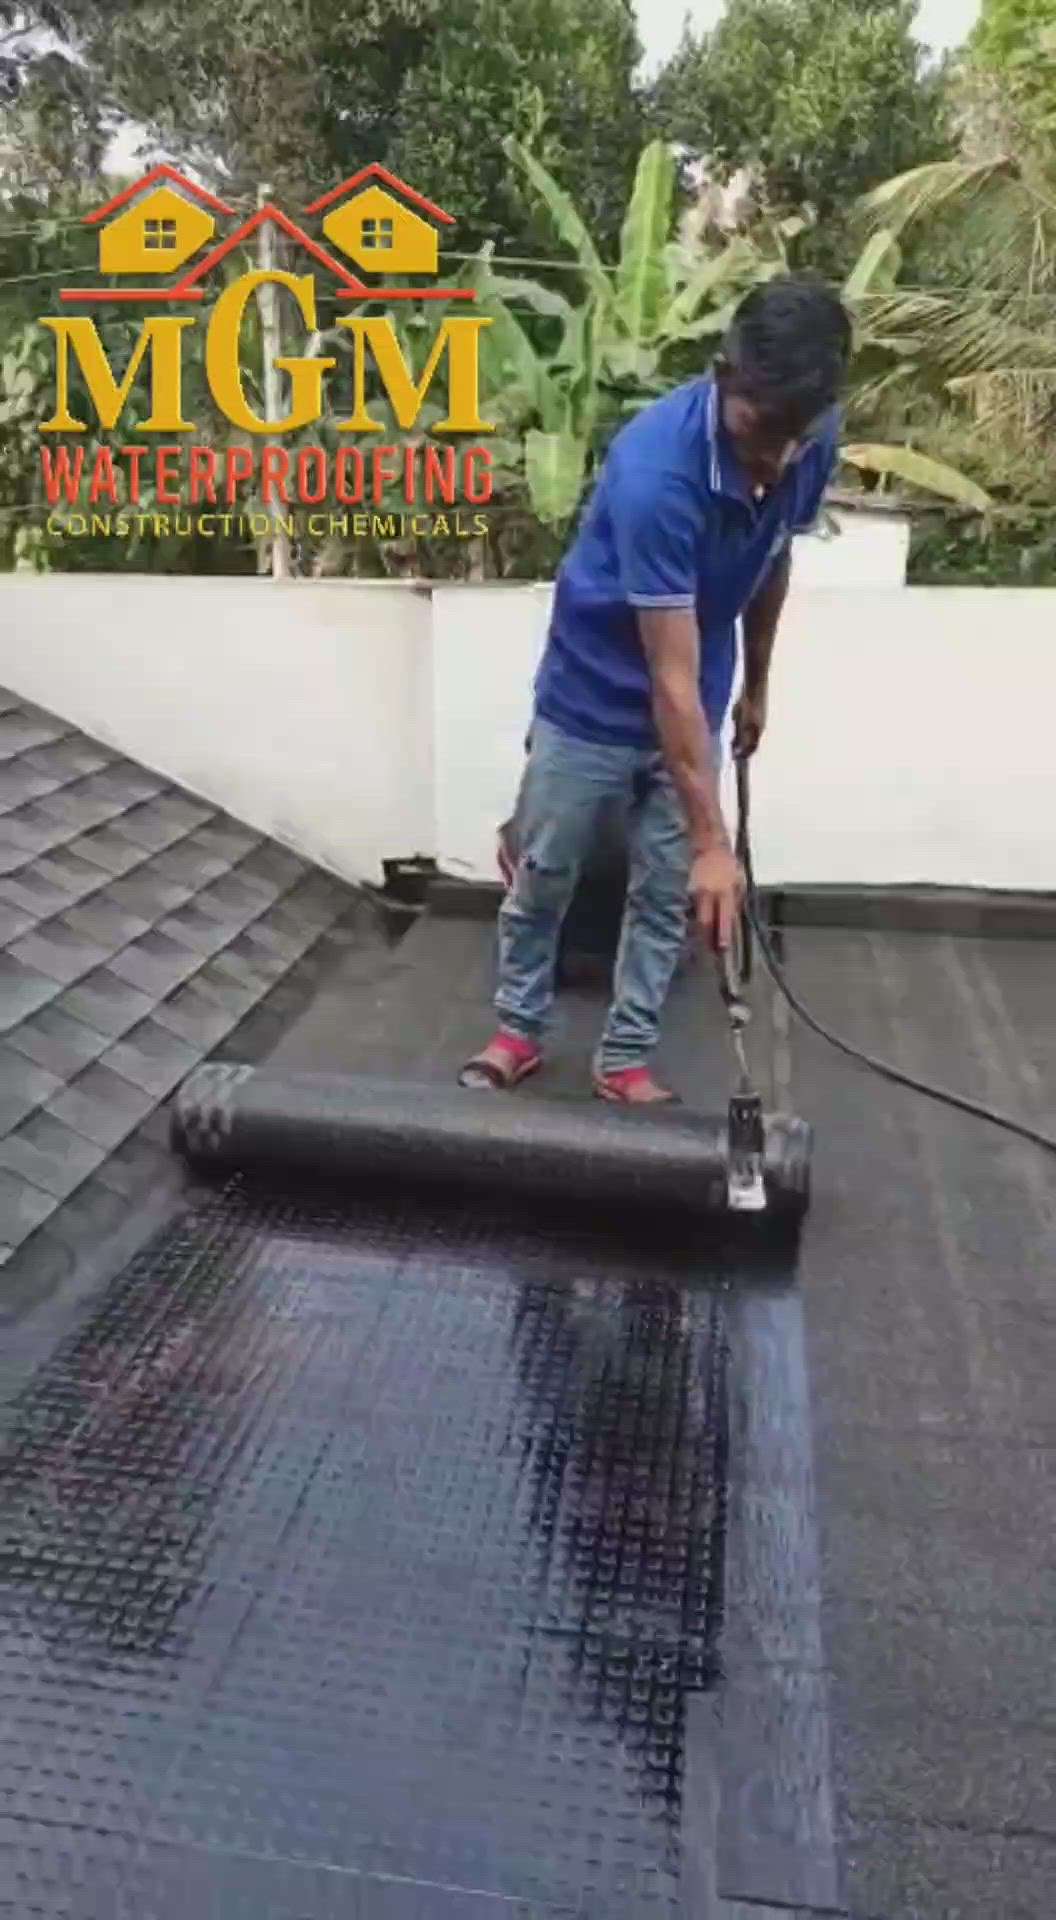 Flooring Designs by Building Supplies MGM Waterproofing  CONSTRUCTION CHEMICALS , Kottayam | Kolo